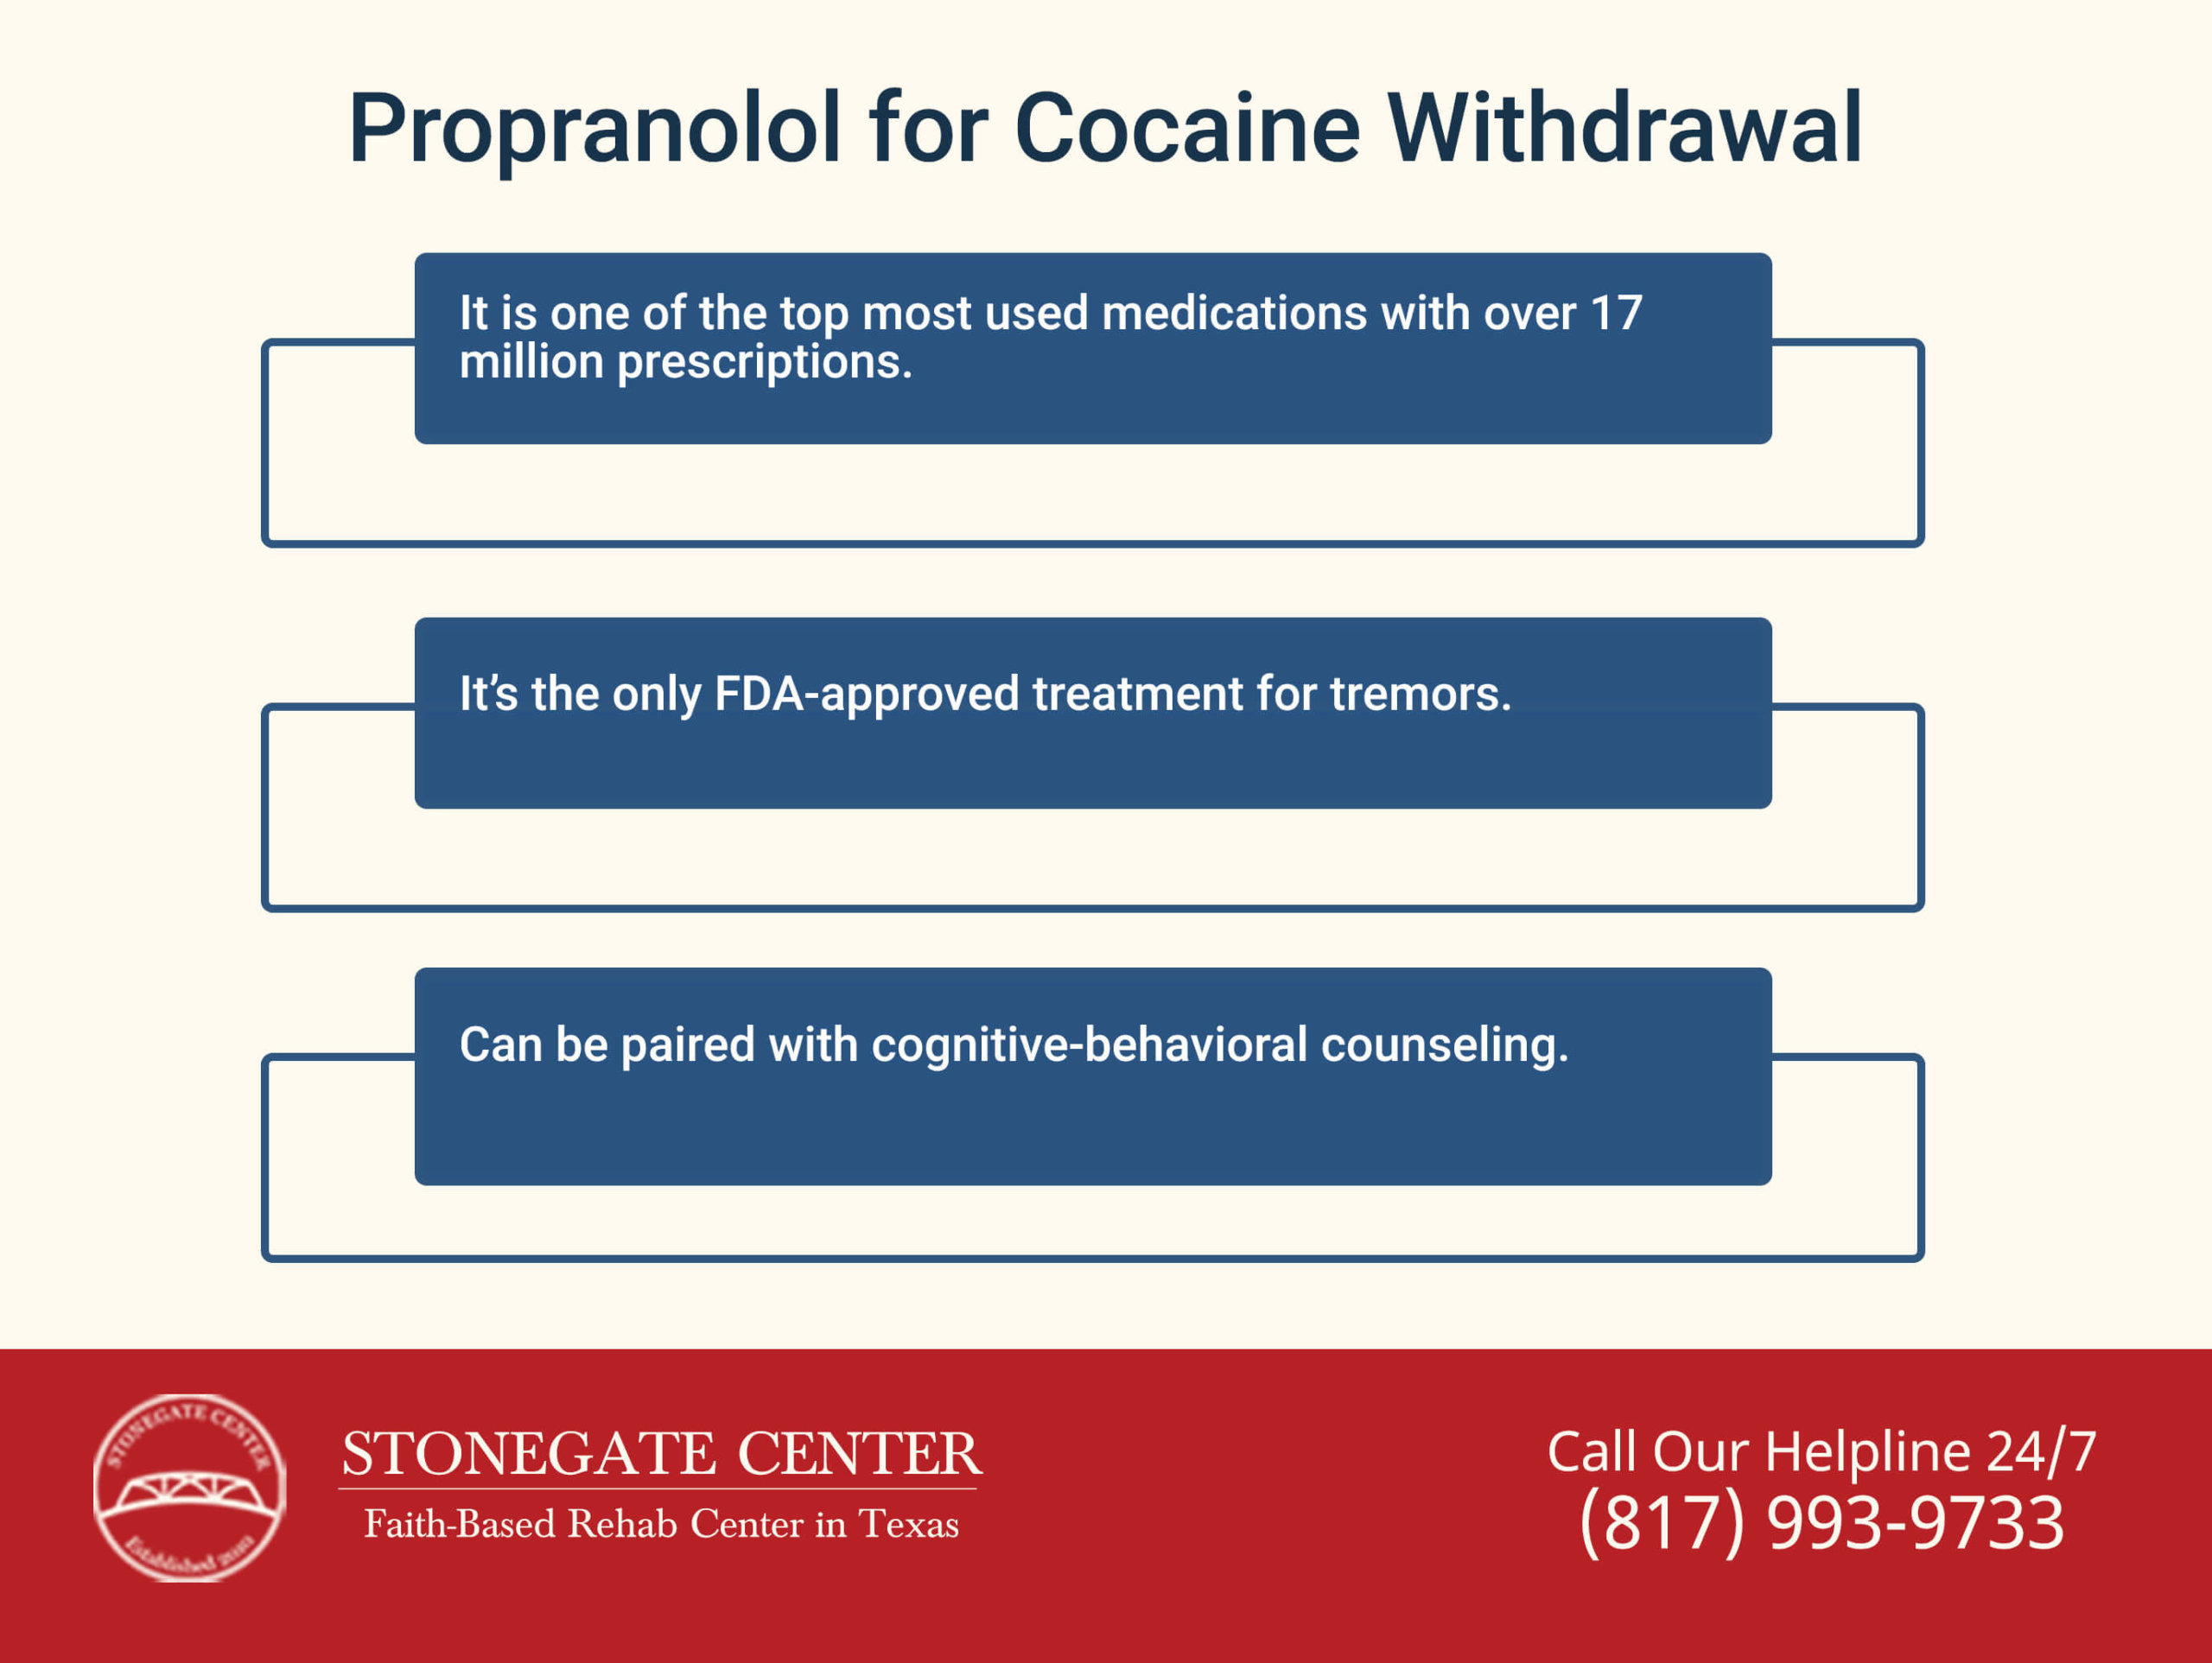 Stonegate Center Blog - Is Propranolol One of the Most Common Medications Given at Detox Centers? - Propranolol for Cocaine Withdrawal